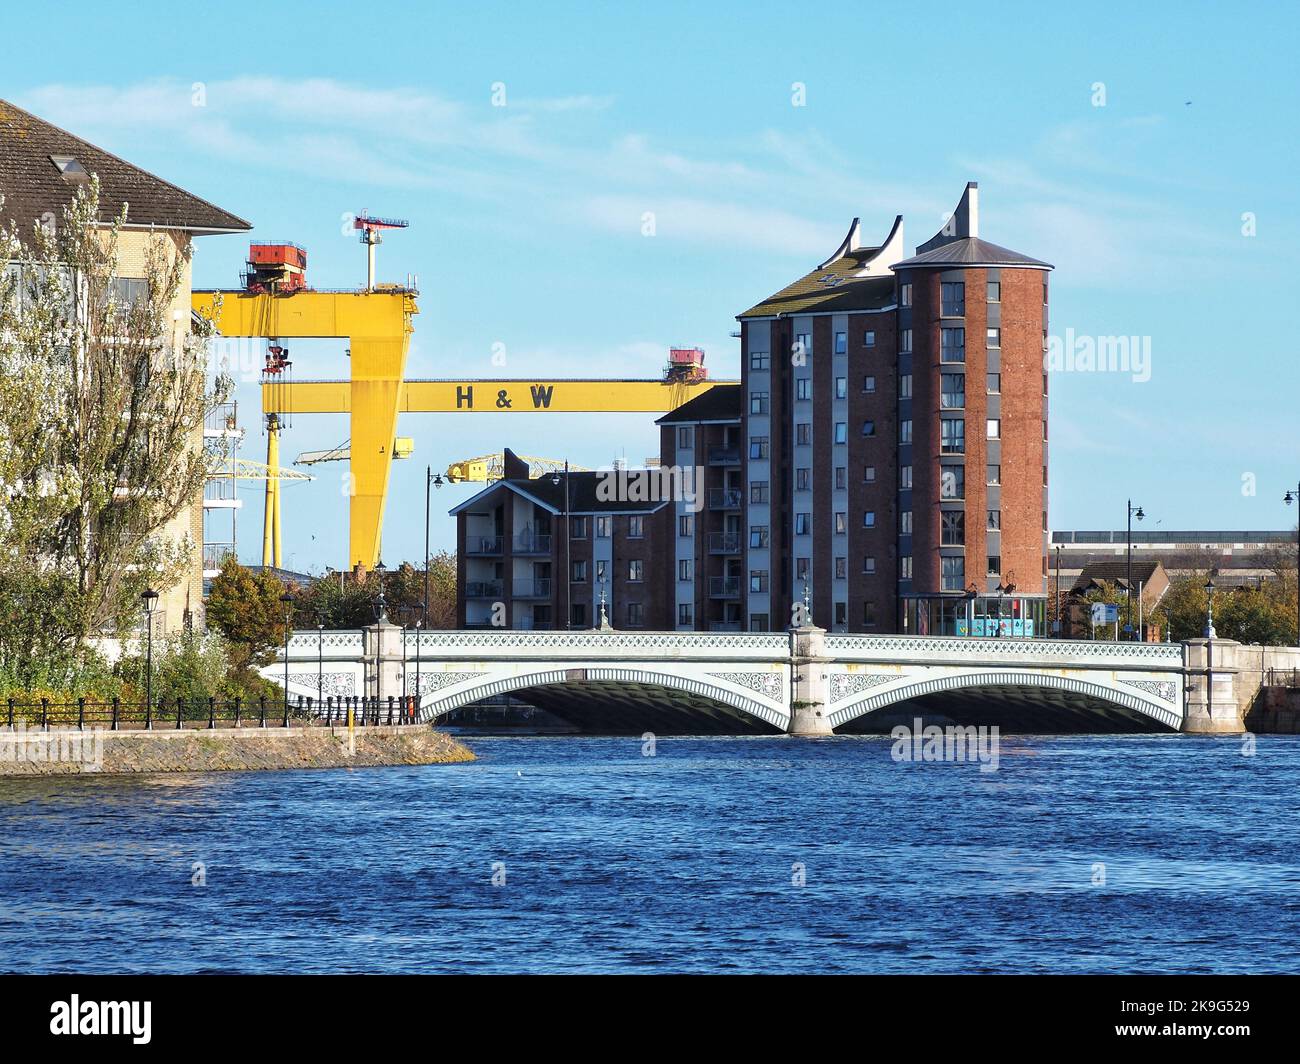 Along the River Lagan in Belfast, Northern Ireland Stock Photo